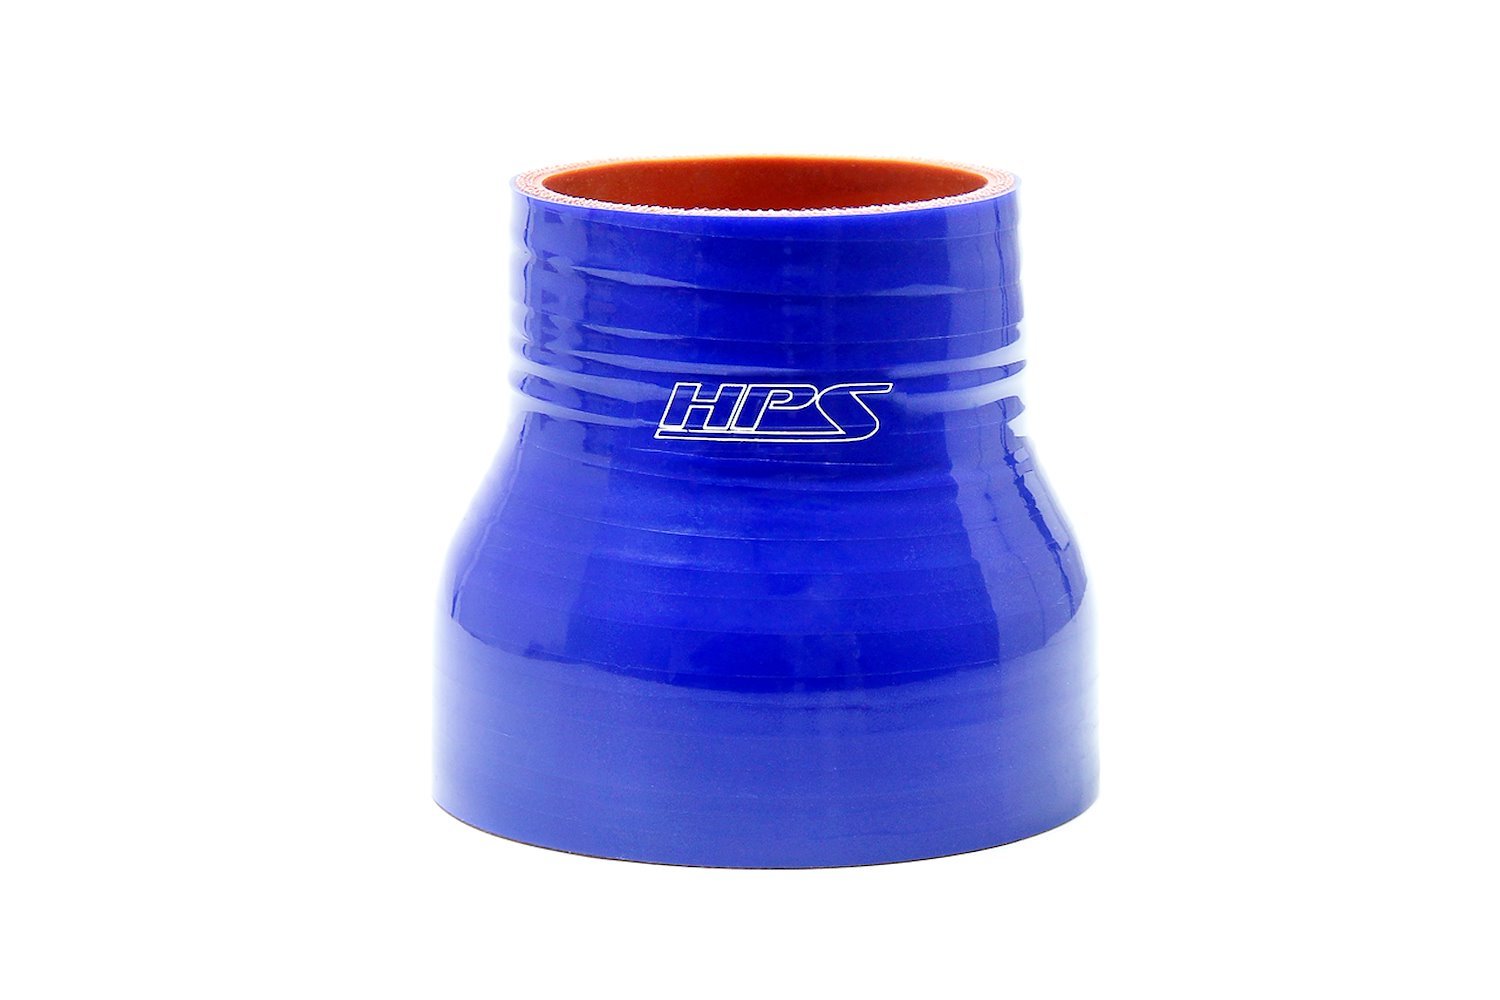 HTSR-162-225-BLUE Silicone Reducer Hose, High-Temp 4-Ply Reinforced, 1-5/8 in. - 2-1/4 in. ID, 3 in. Long, Blue